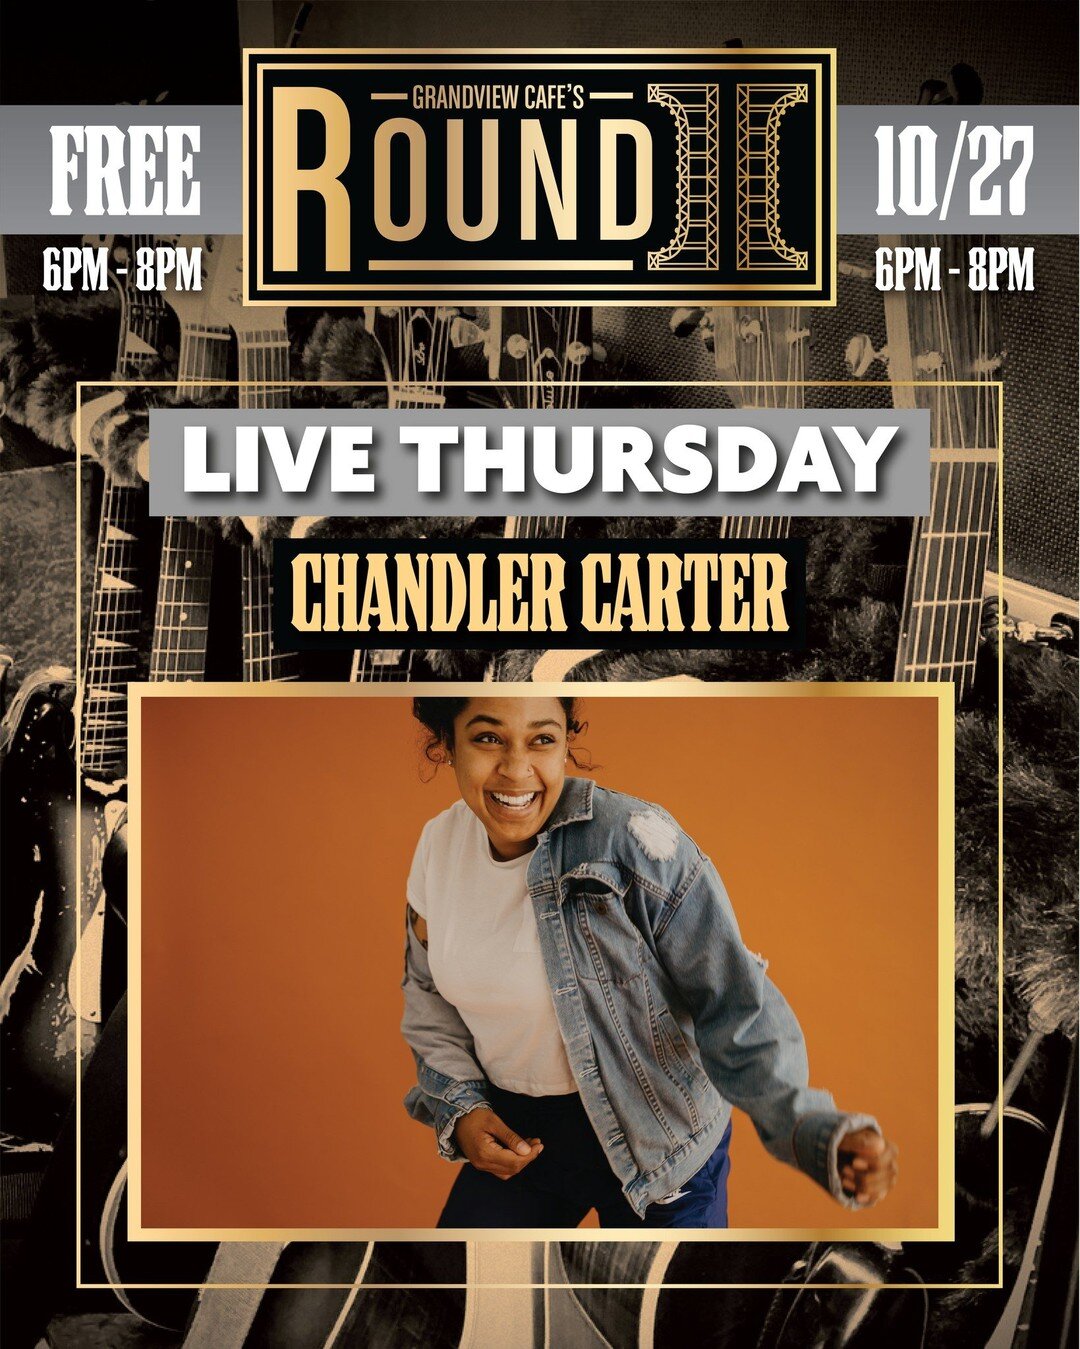 THURSDAY 10/27 | This Thursday our live music night features the musical stylings of Chandler Carter playing from 6PM-8PM. Come on down and enjoy our $8 Smokehouse Burger special and a delicious cocktail from the bar. Relaxing vibes &amp; good times!